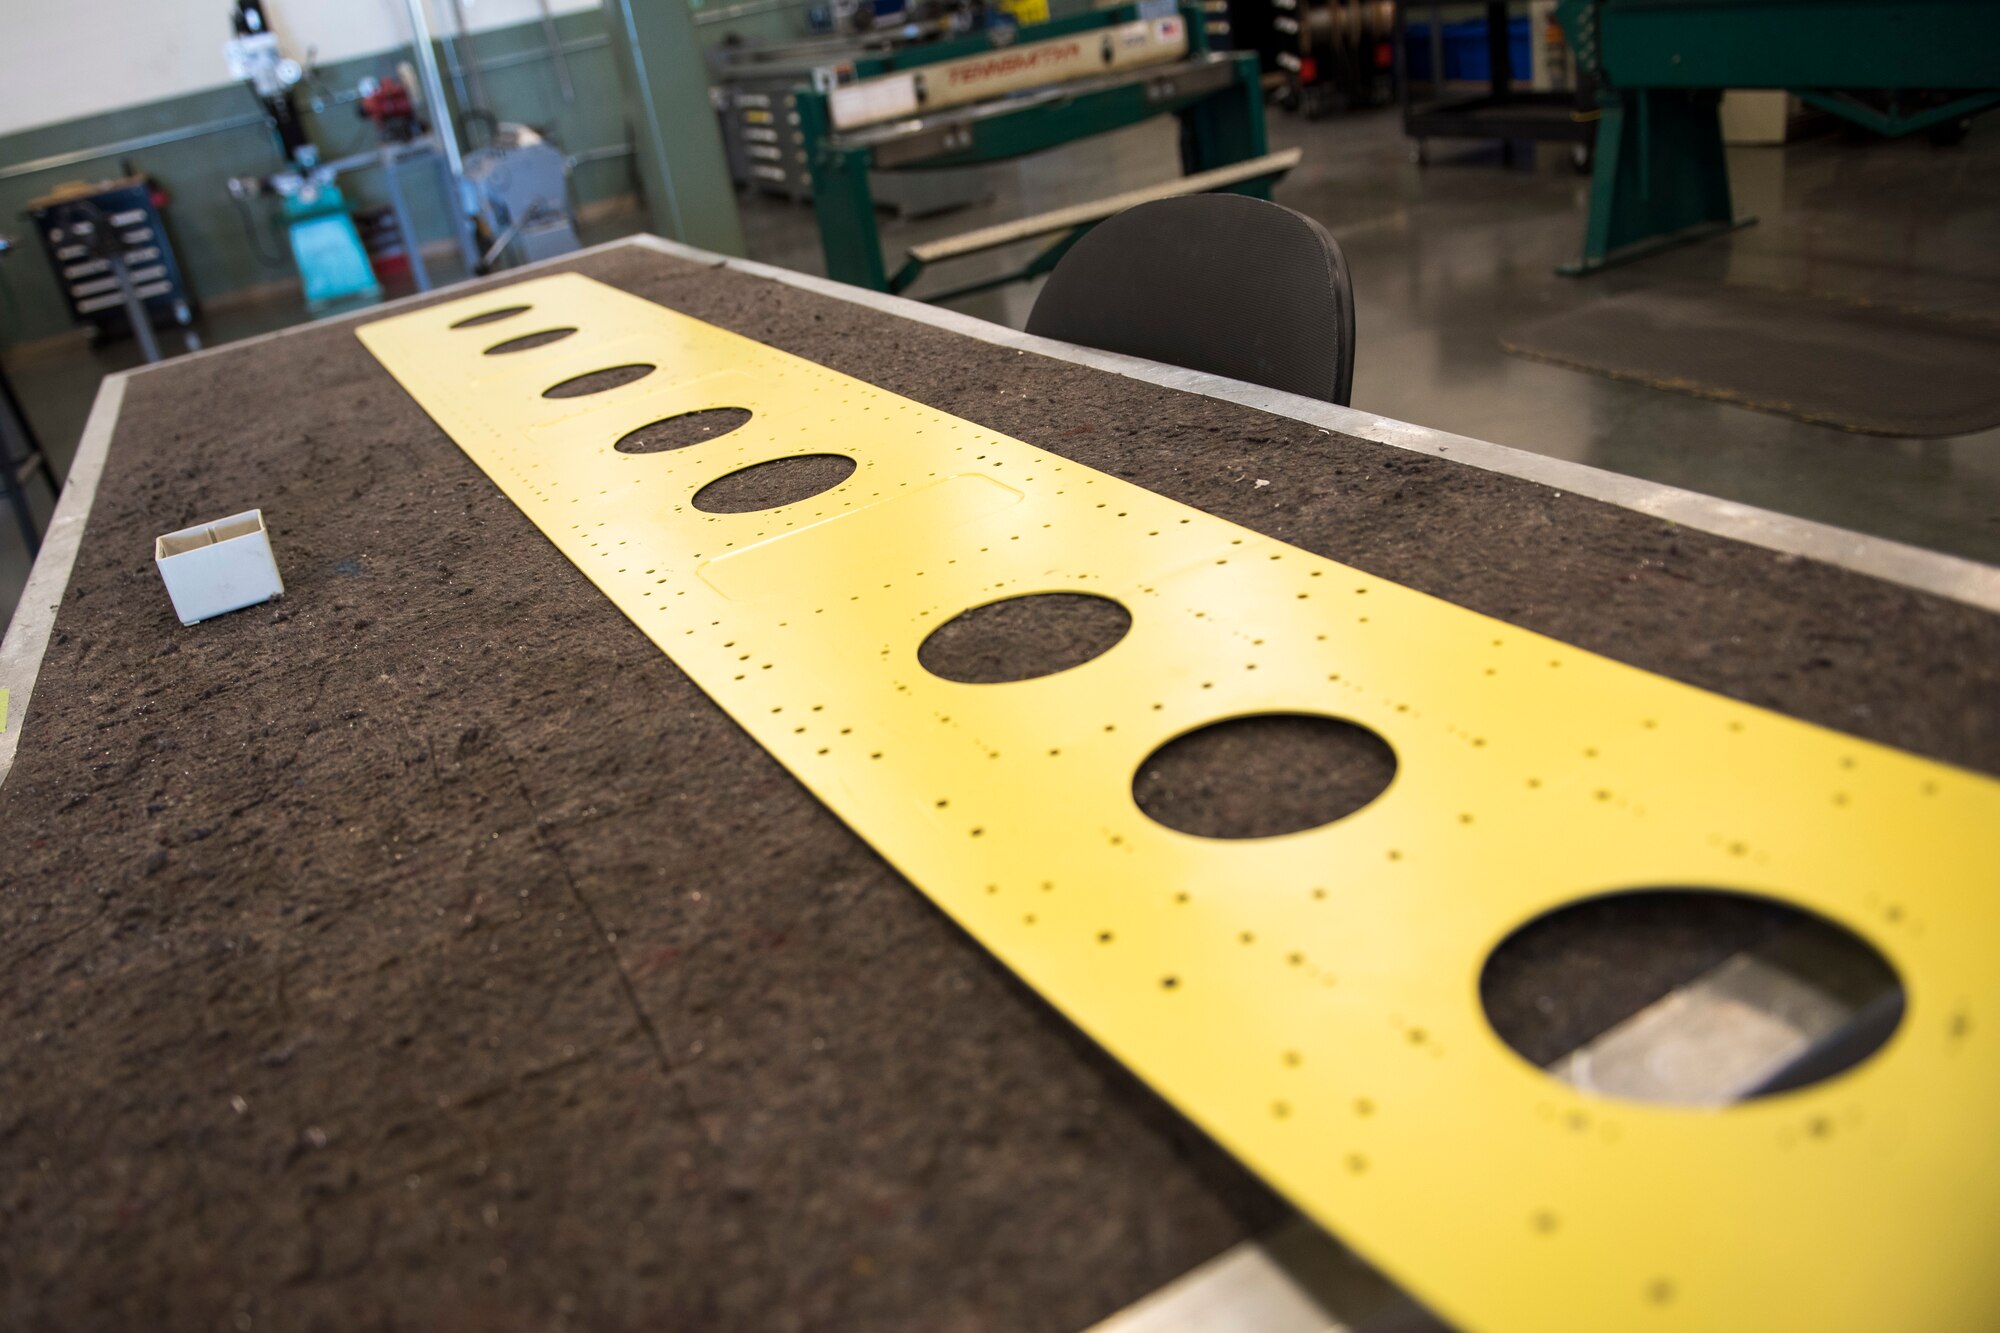 An eight-foot long metal panel from a C-17 cargo ramp lays on a table in the 167th Airlift Wing’s sheet metal shop after being sandblasted to remove corrosion and primed, May 27, 2020.